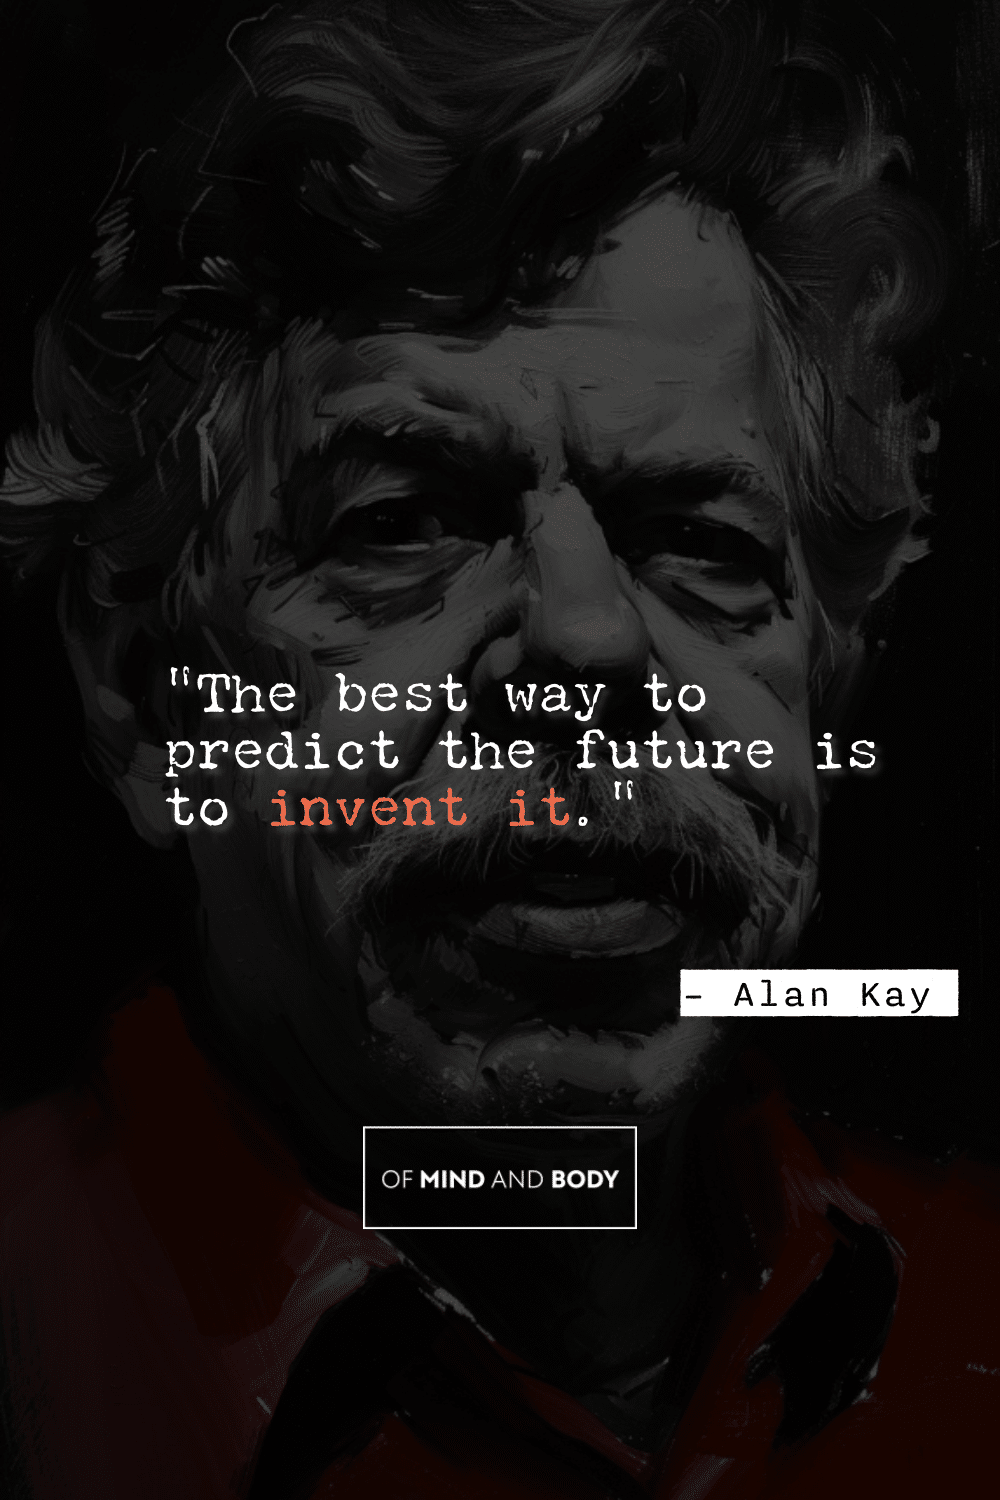 Quotes on Self Improvement - "The best way to predict the future is to invent it."